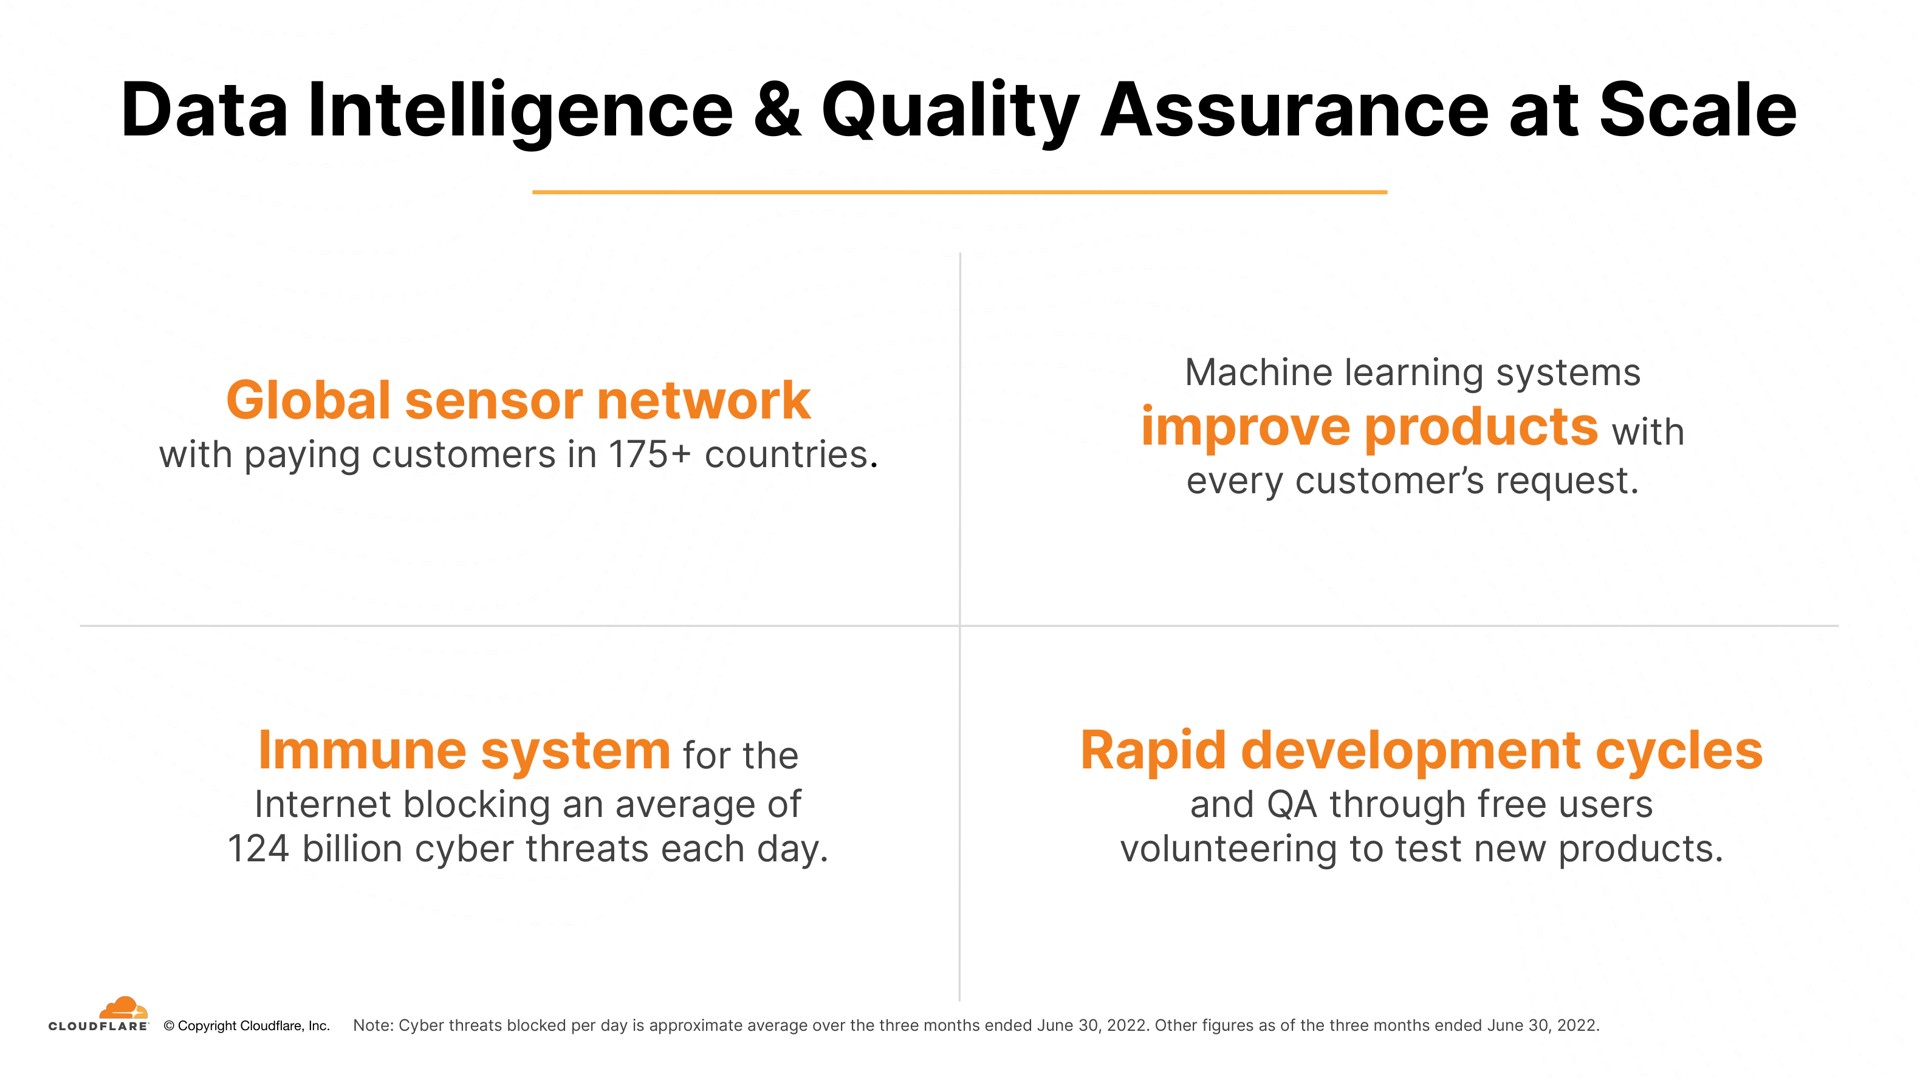 data intelligence quality assurance at scale global sensor network improve products with immune system for the rapid development cycles | Cloudflare